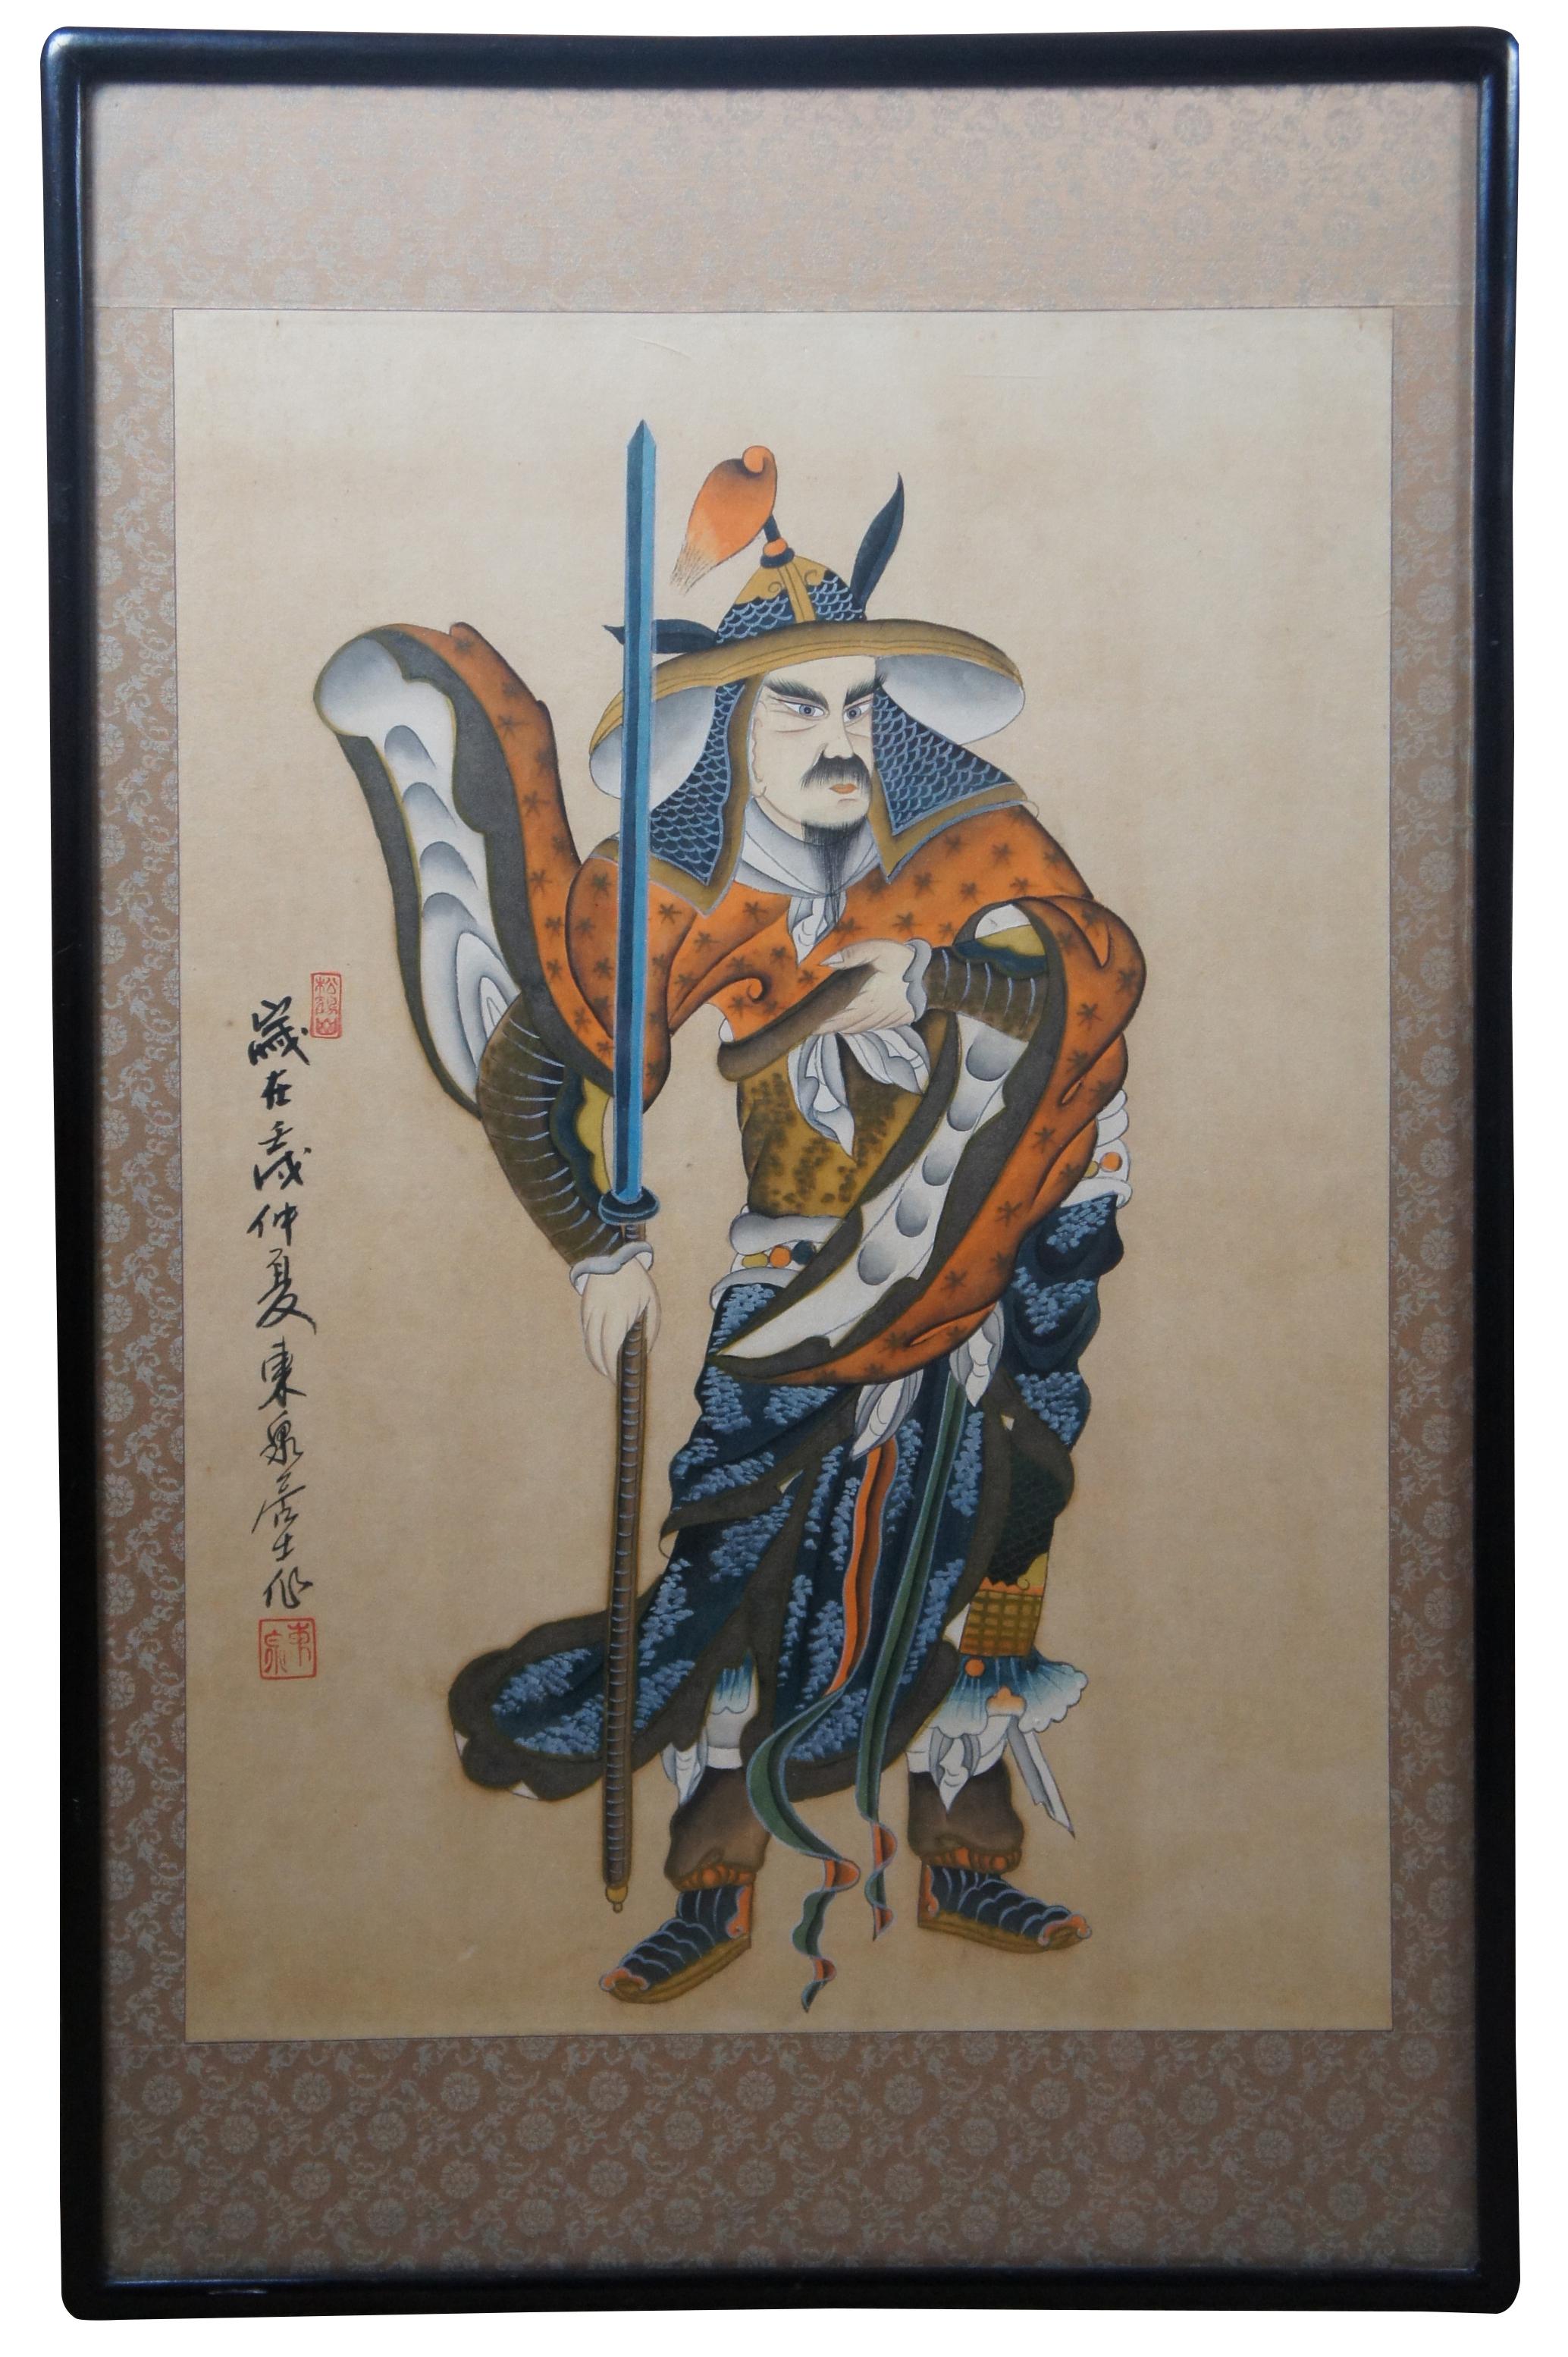 Pair of antique woodblock prints showing warriors in Mongolian armor/clothing. Signed along the left side.

Measures: Sans frame - 19.5” x 28”, 37